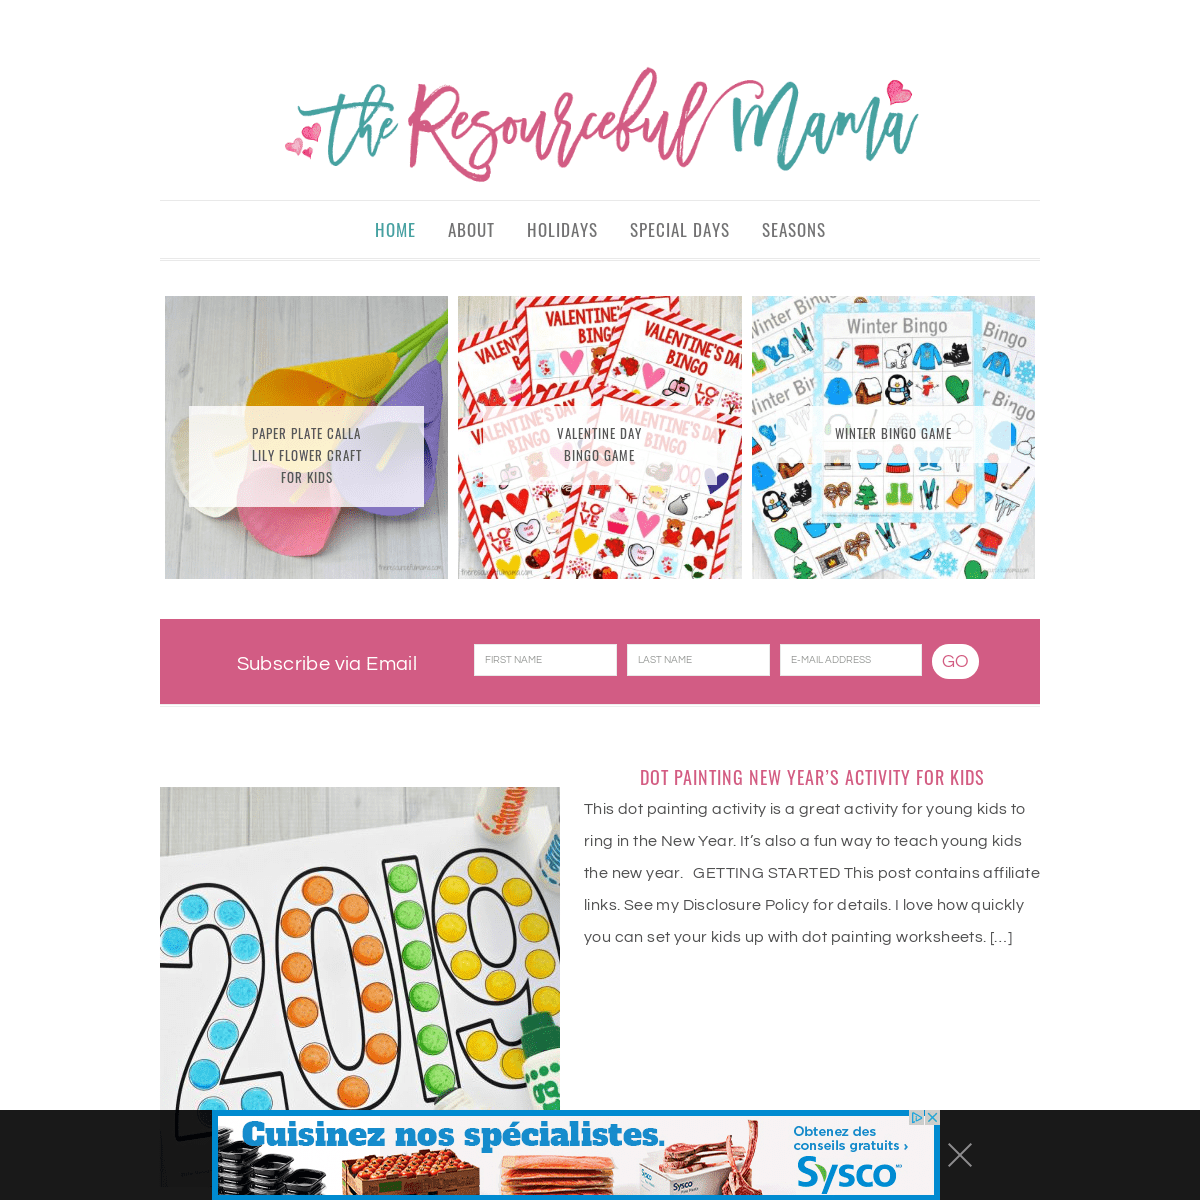 A complete backup of https://theresourcefulmama.com